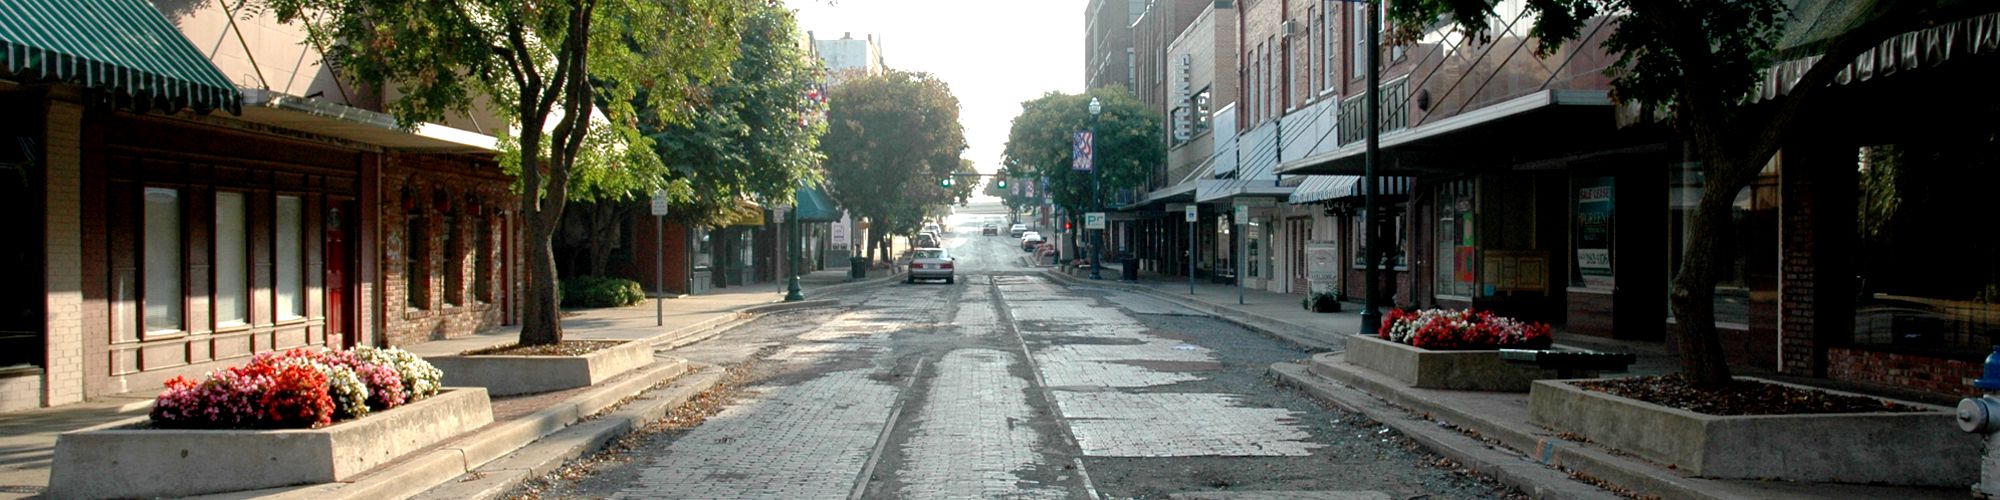 Main Street in downtown Johnson City with bricks and tracks revealed after pavement removed